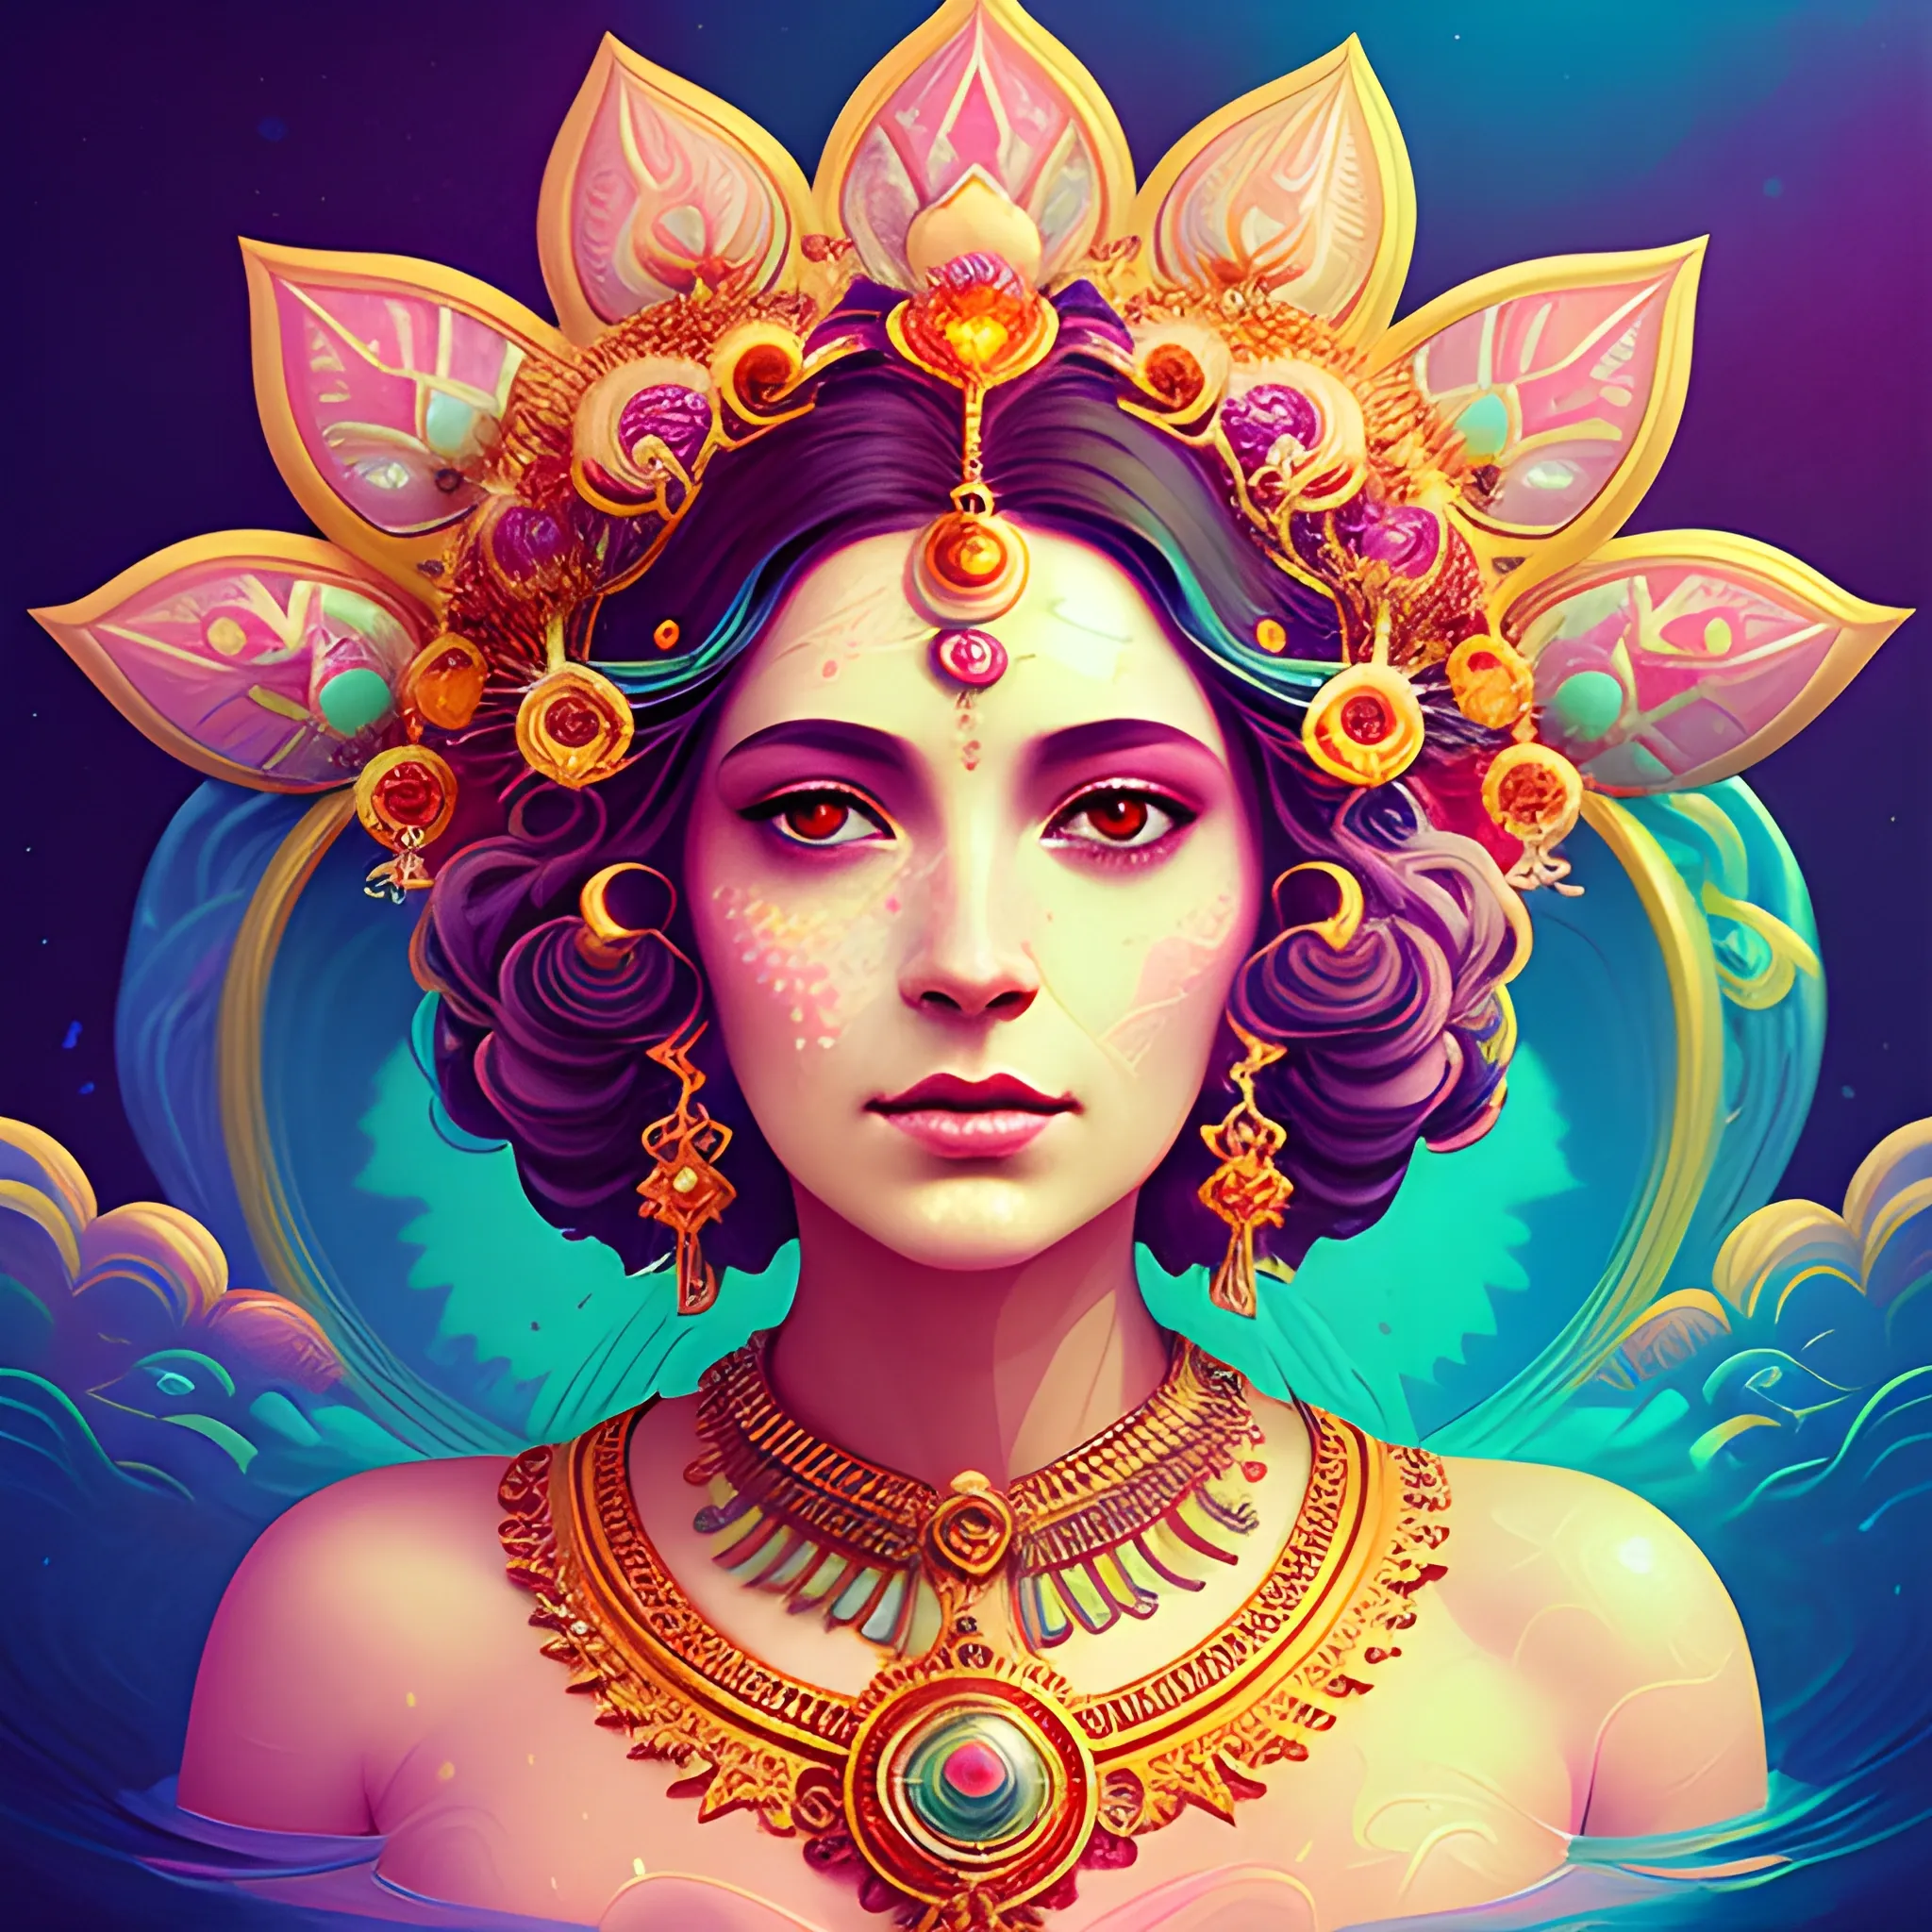 Flowery beautiful face divine feminine intimate expression empress or priestess with gold jewellery, by petros afshar, ross tran, Tom Bagshaw, tom whalen, underwater bubbly psychedelic clouds, Anaglyph 3D lens blur effect